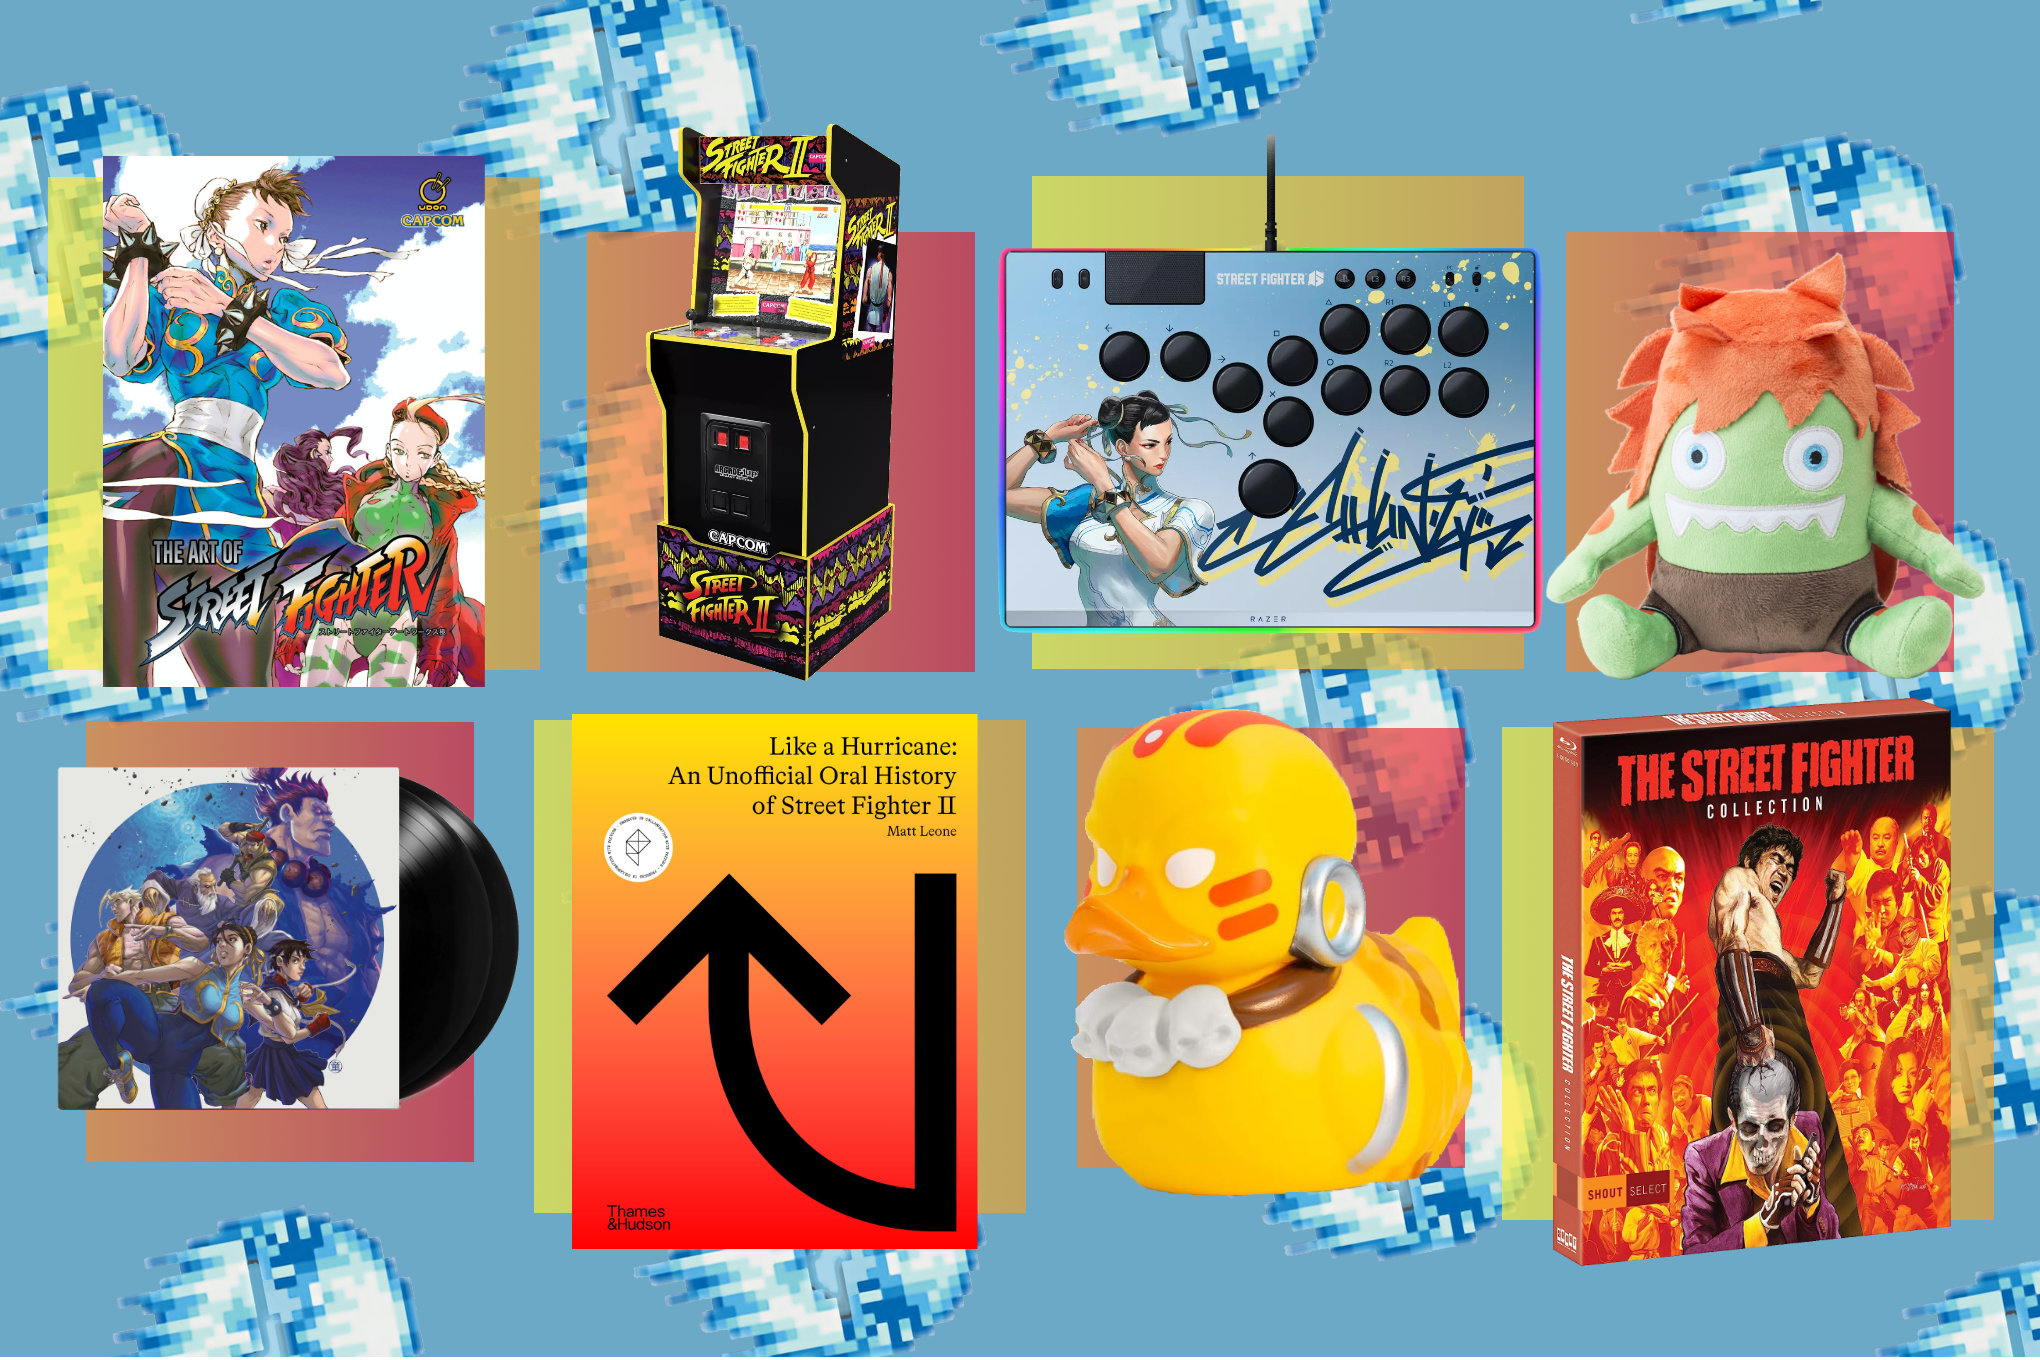 An image collage containing multiple Street Fighter-related gifts, including books, comics, movies, toys, and arcade sticks to celebrate your fandom.